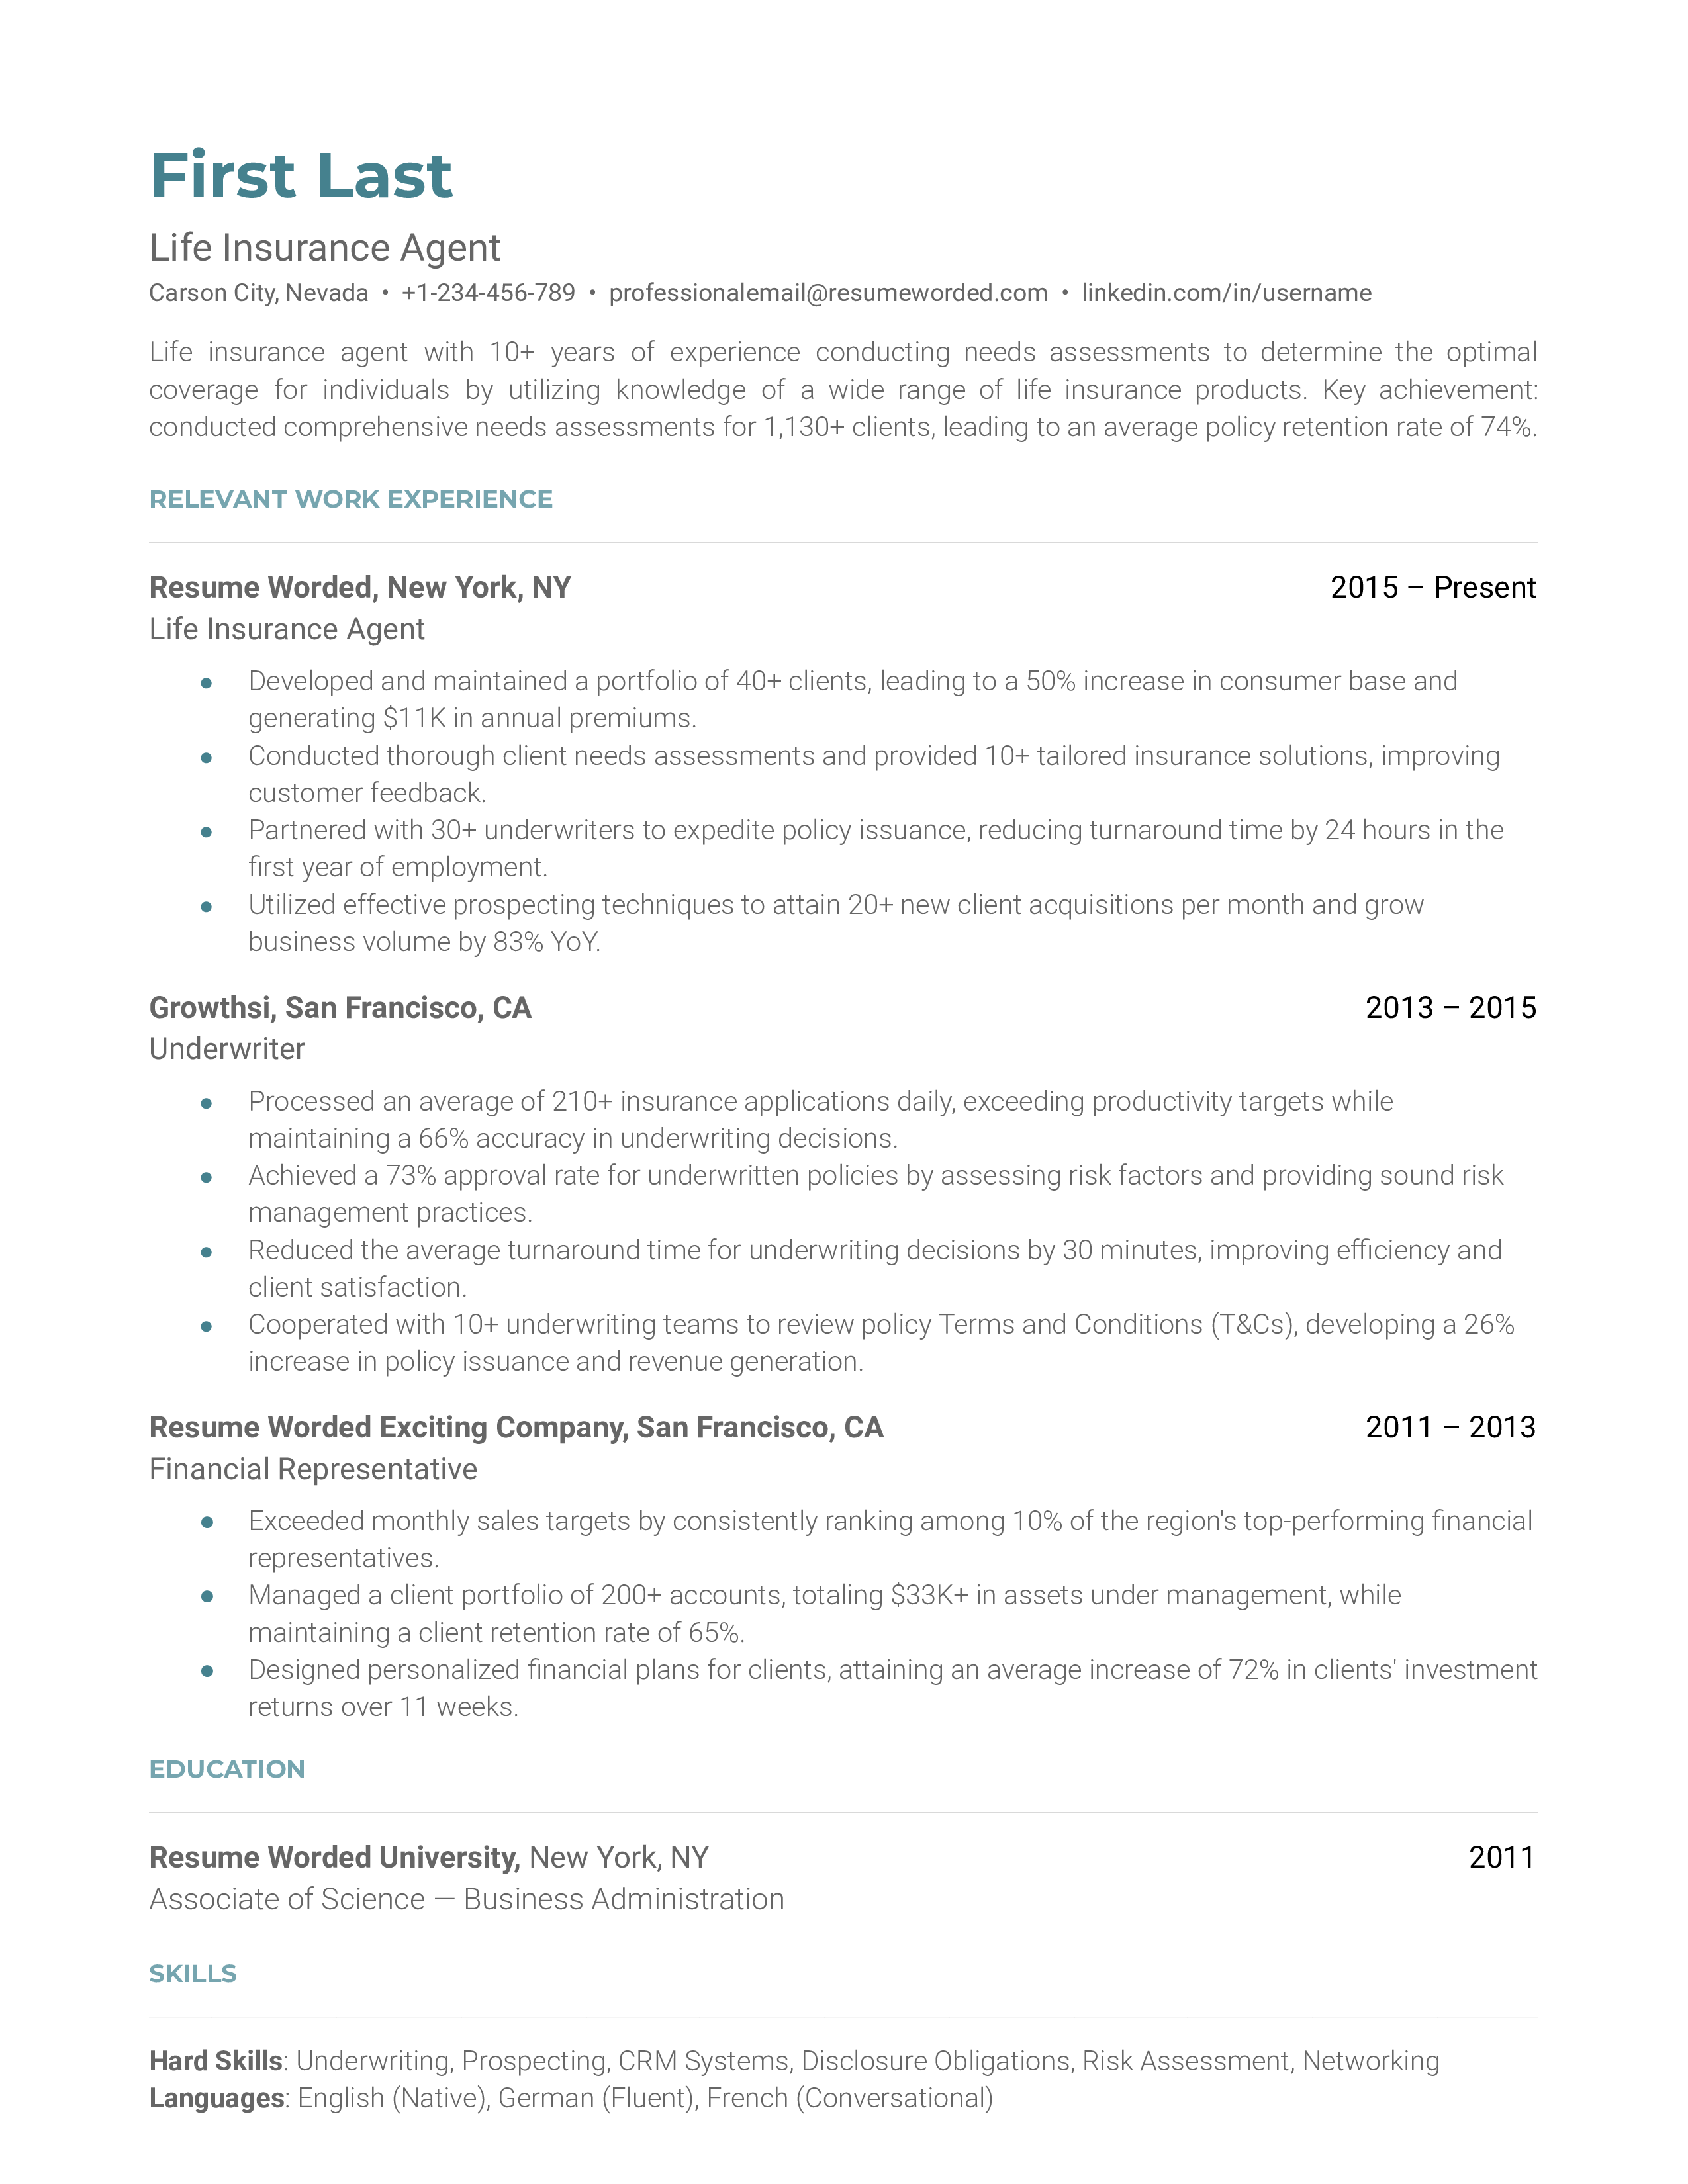 Life Insurance Agent's CV showing regulatory knowledge and tech skills.